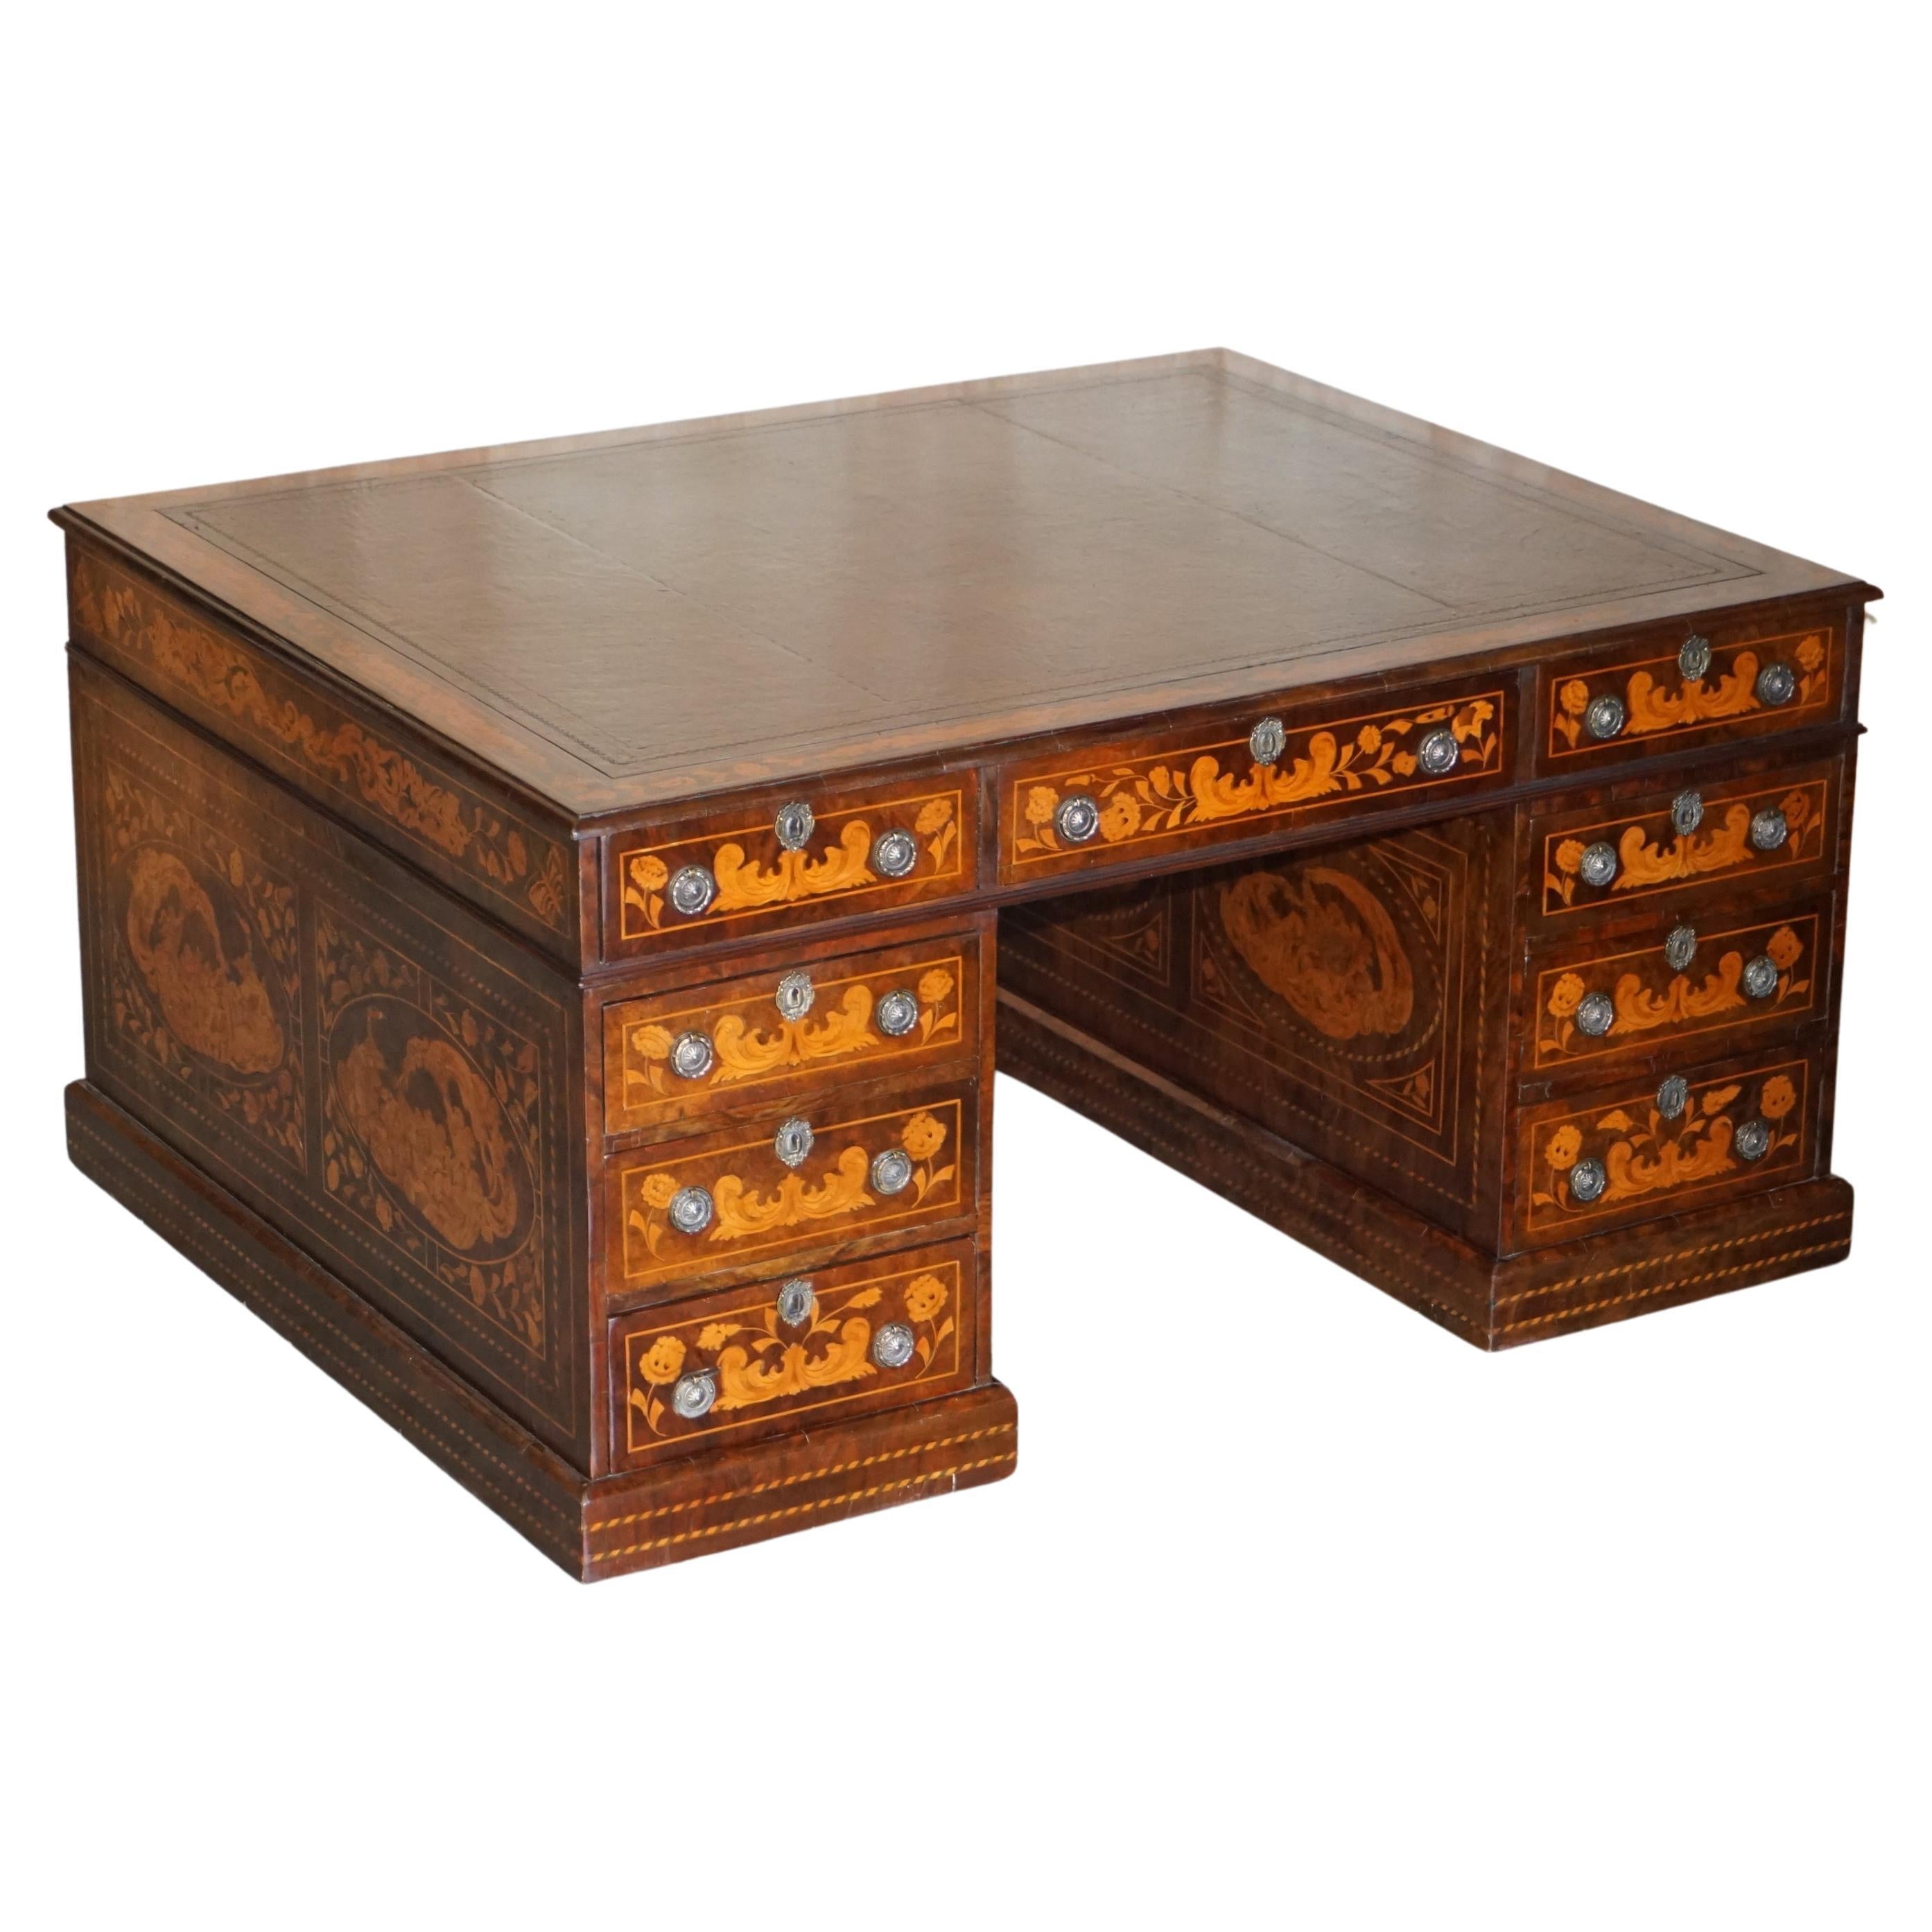 Antique Restored Dutch Marquetry Inlaid Double Sided Twin Pedestal Partners Desk For Sale